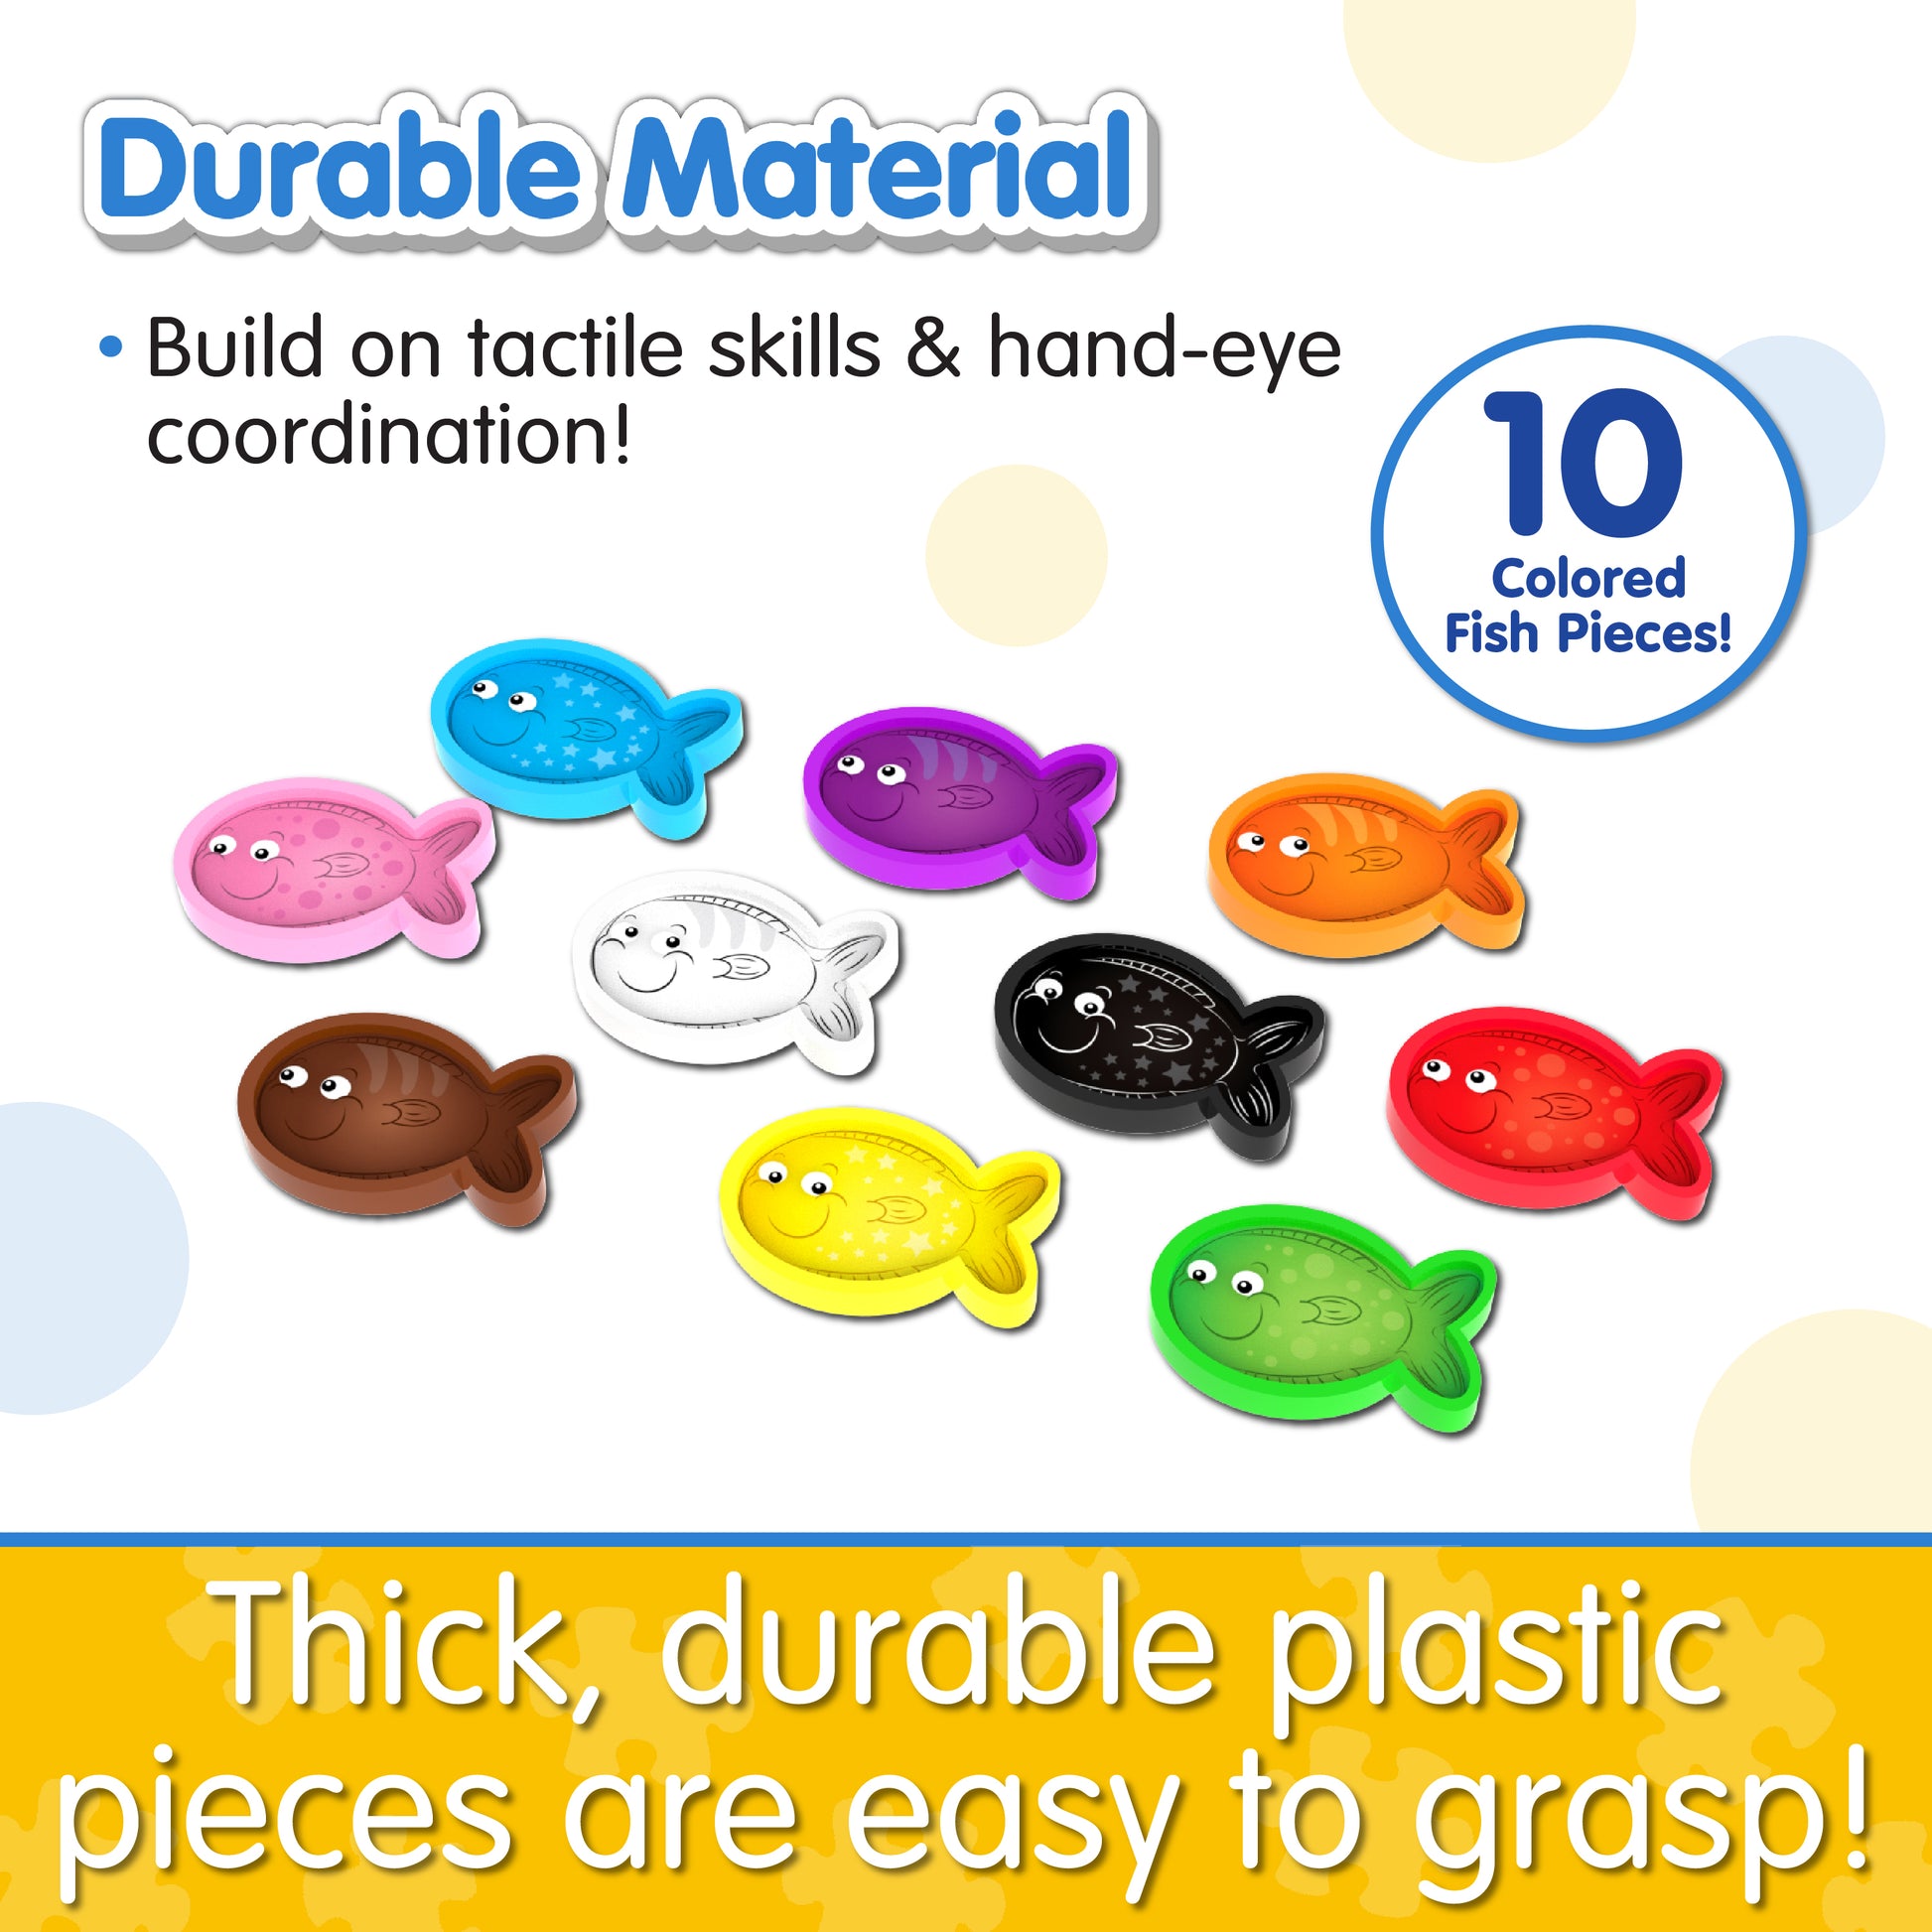 Infographic of Learn With Me Color Fun Fish Bowl pieces that reads, "Thick, durable plastic pieces are easy to grasp!"